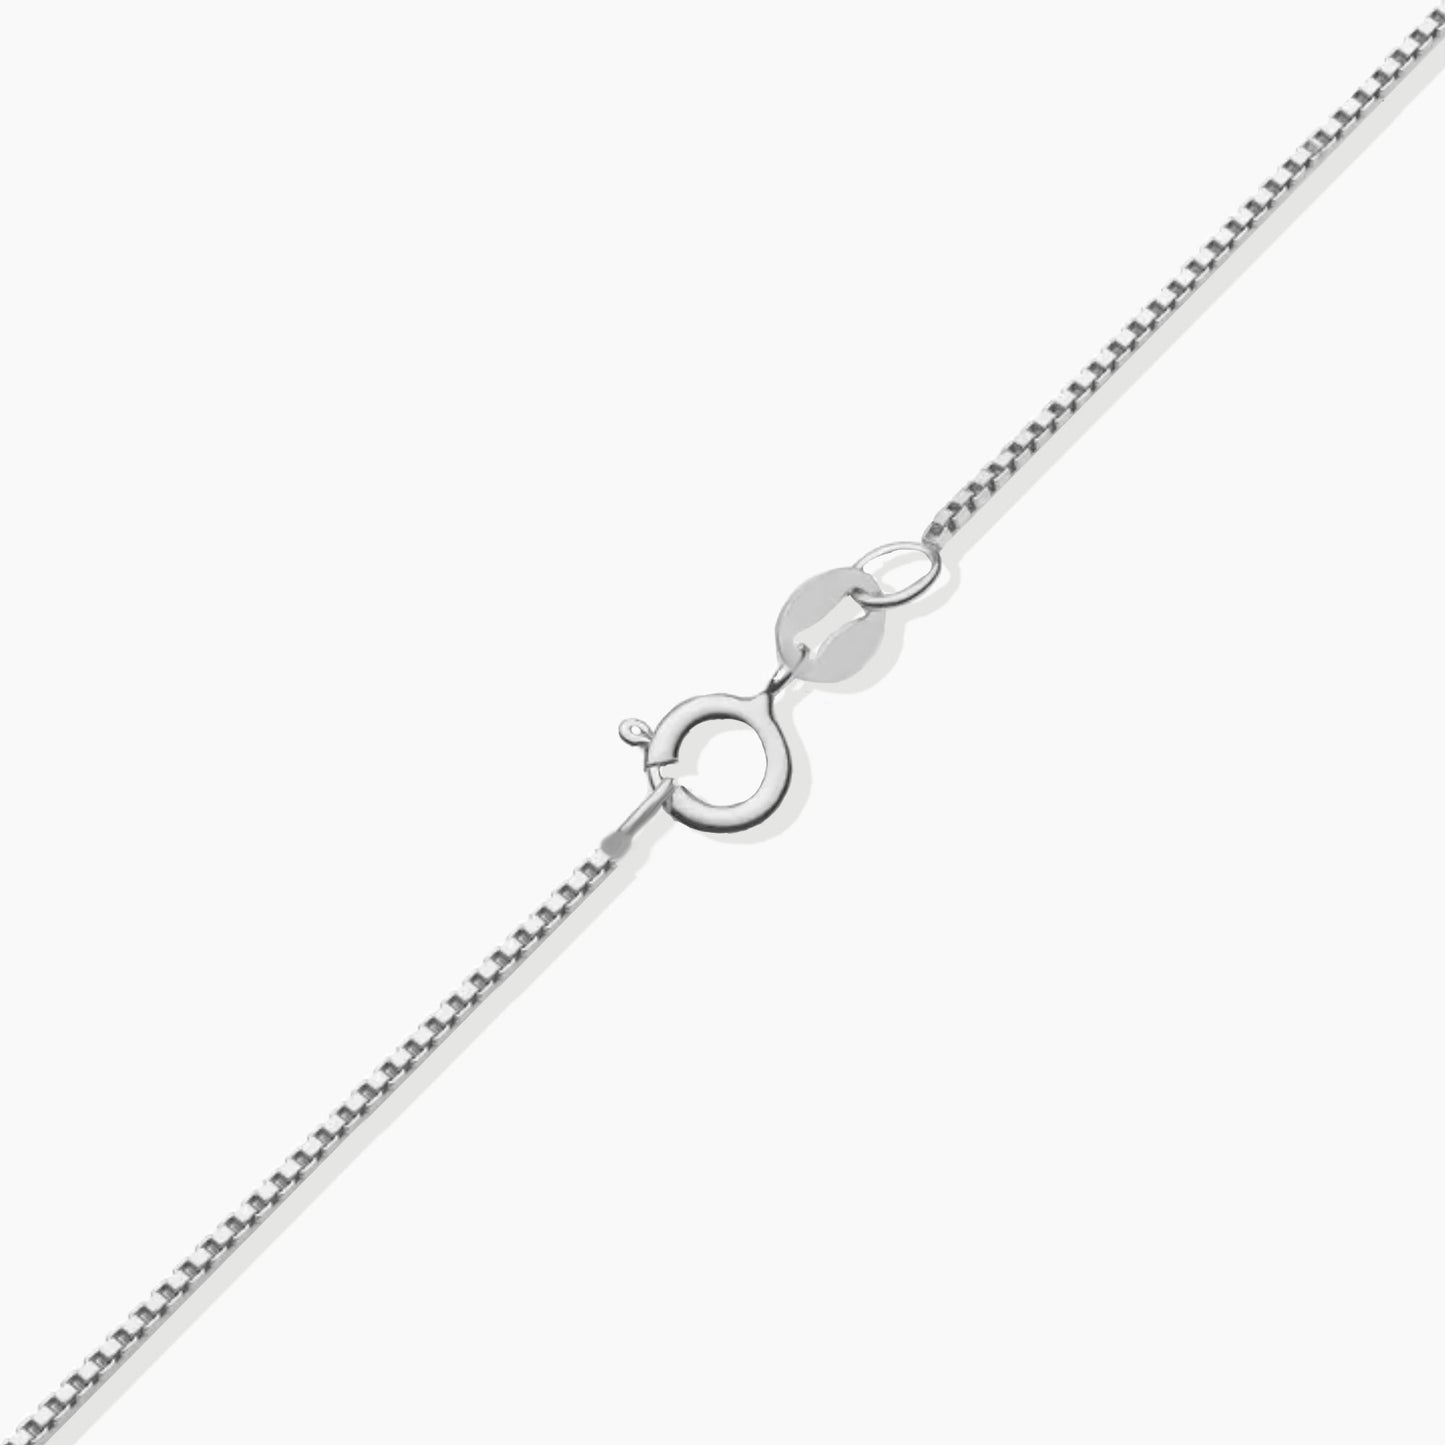 Irosk Tri Necklace in Sterling Silver -  Sapphire